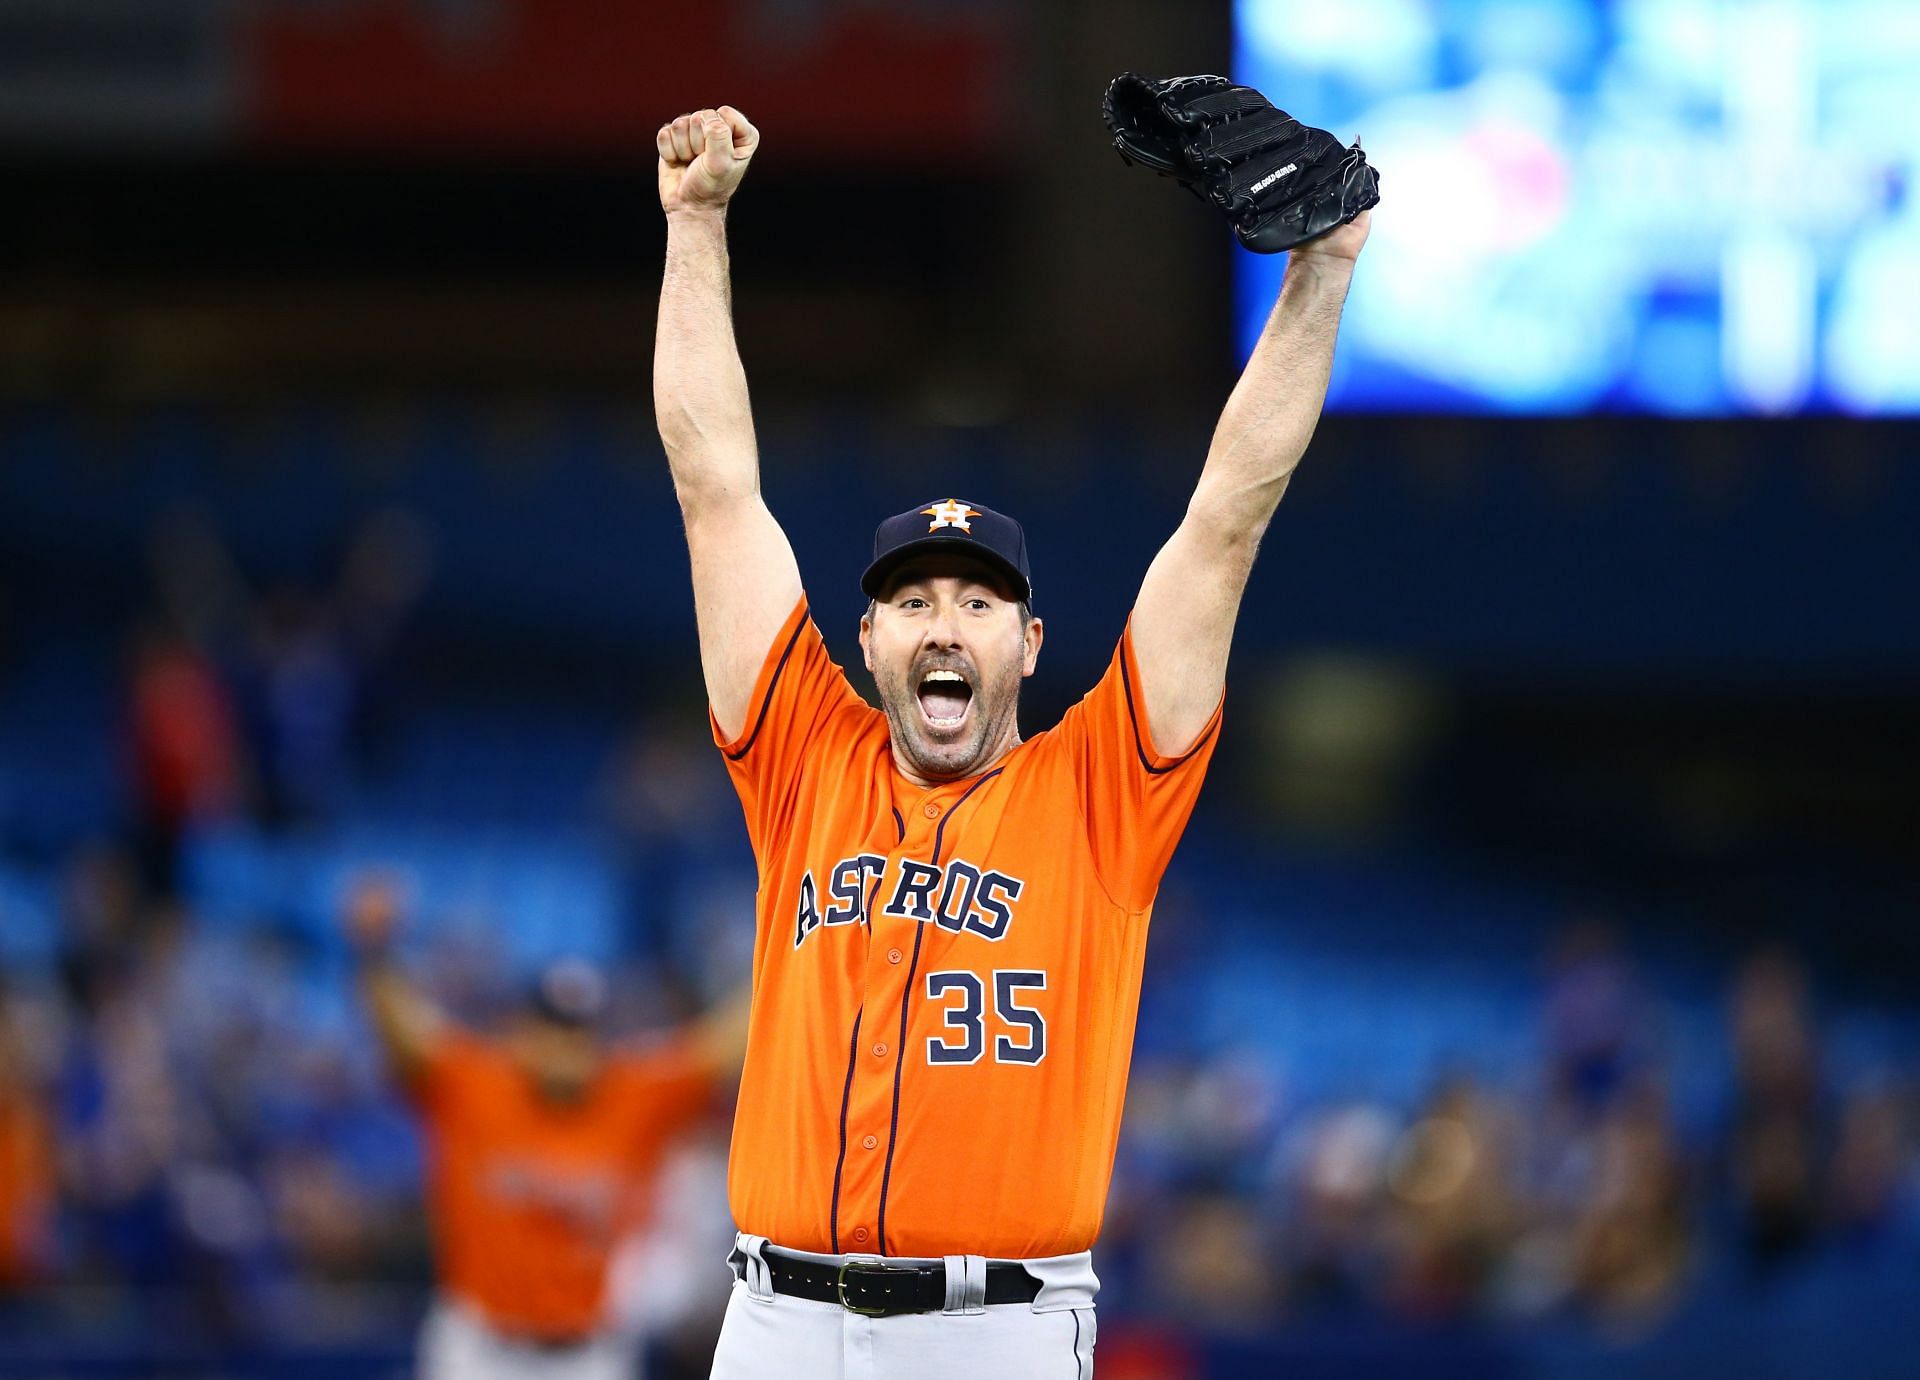 Justin Verlander $86M Contract Shows Mets Are All-In on 2023